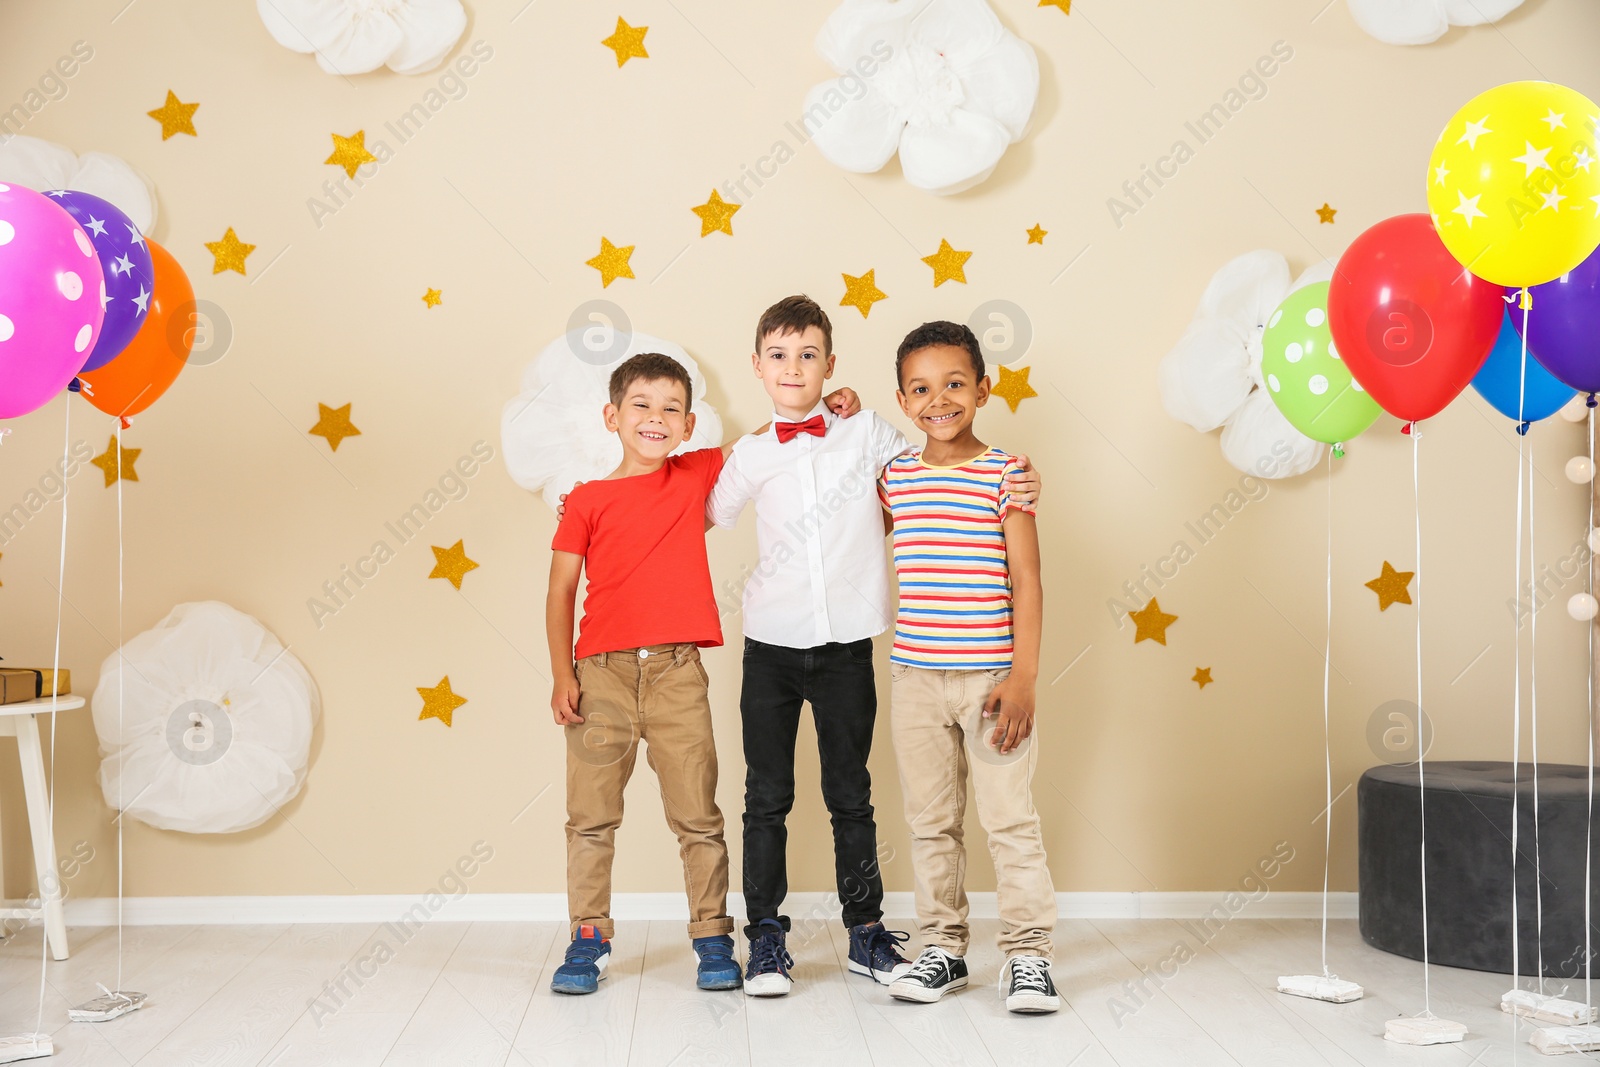 Photo of Adorable little boys at birthday party indoors